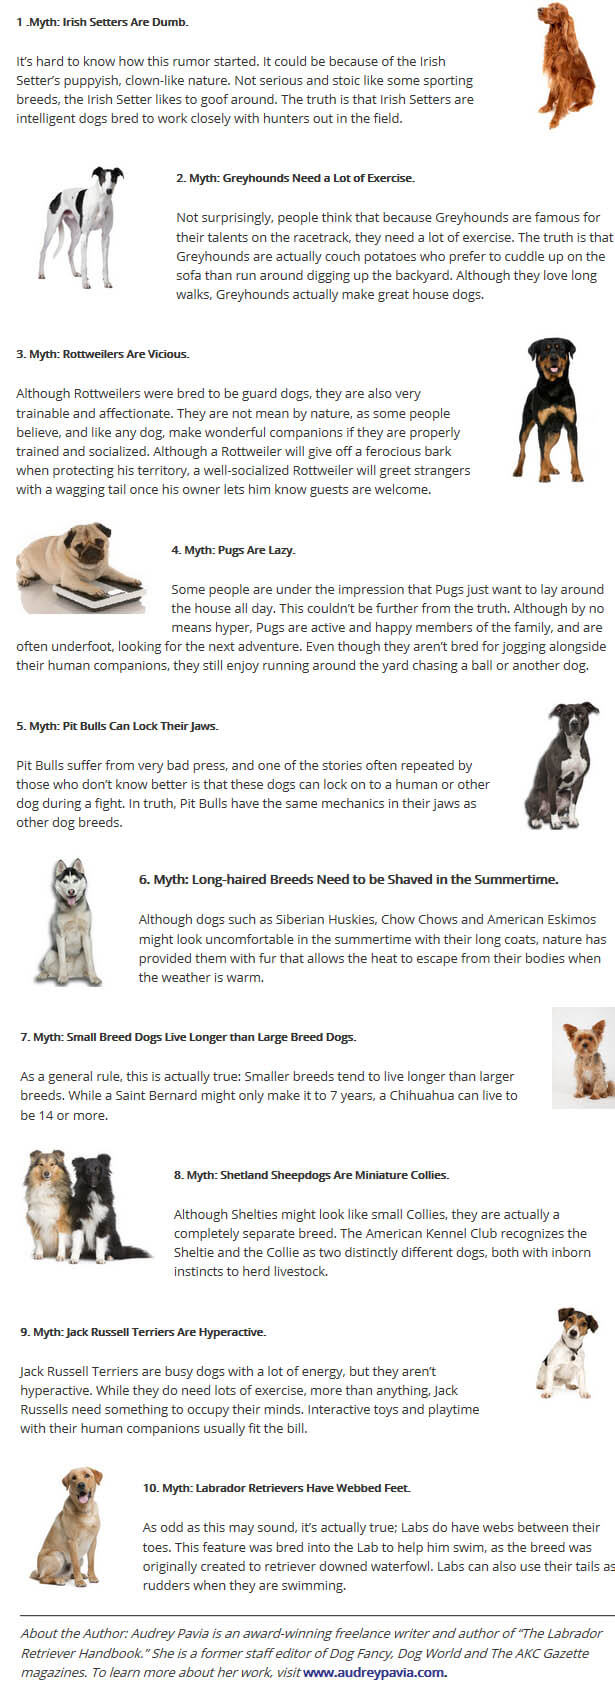 DOG BREED MISCONCEPTIONS